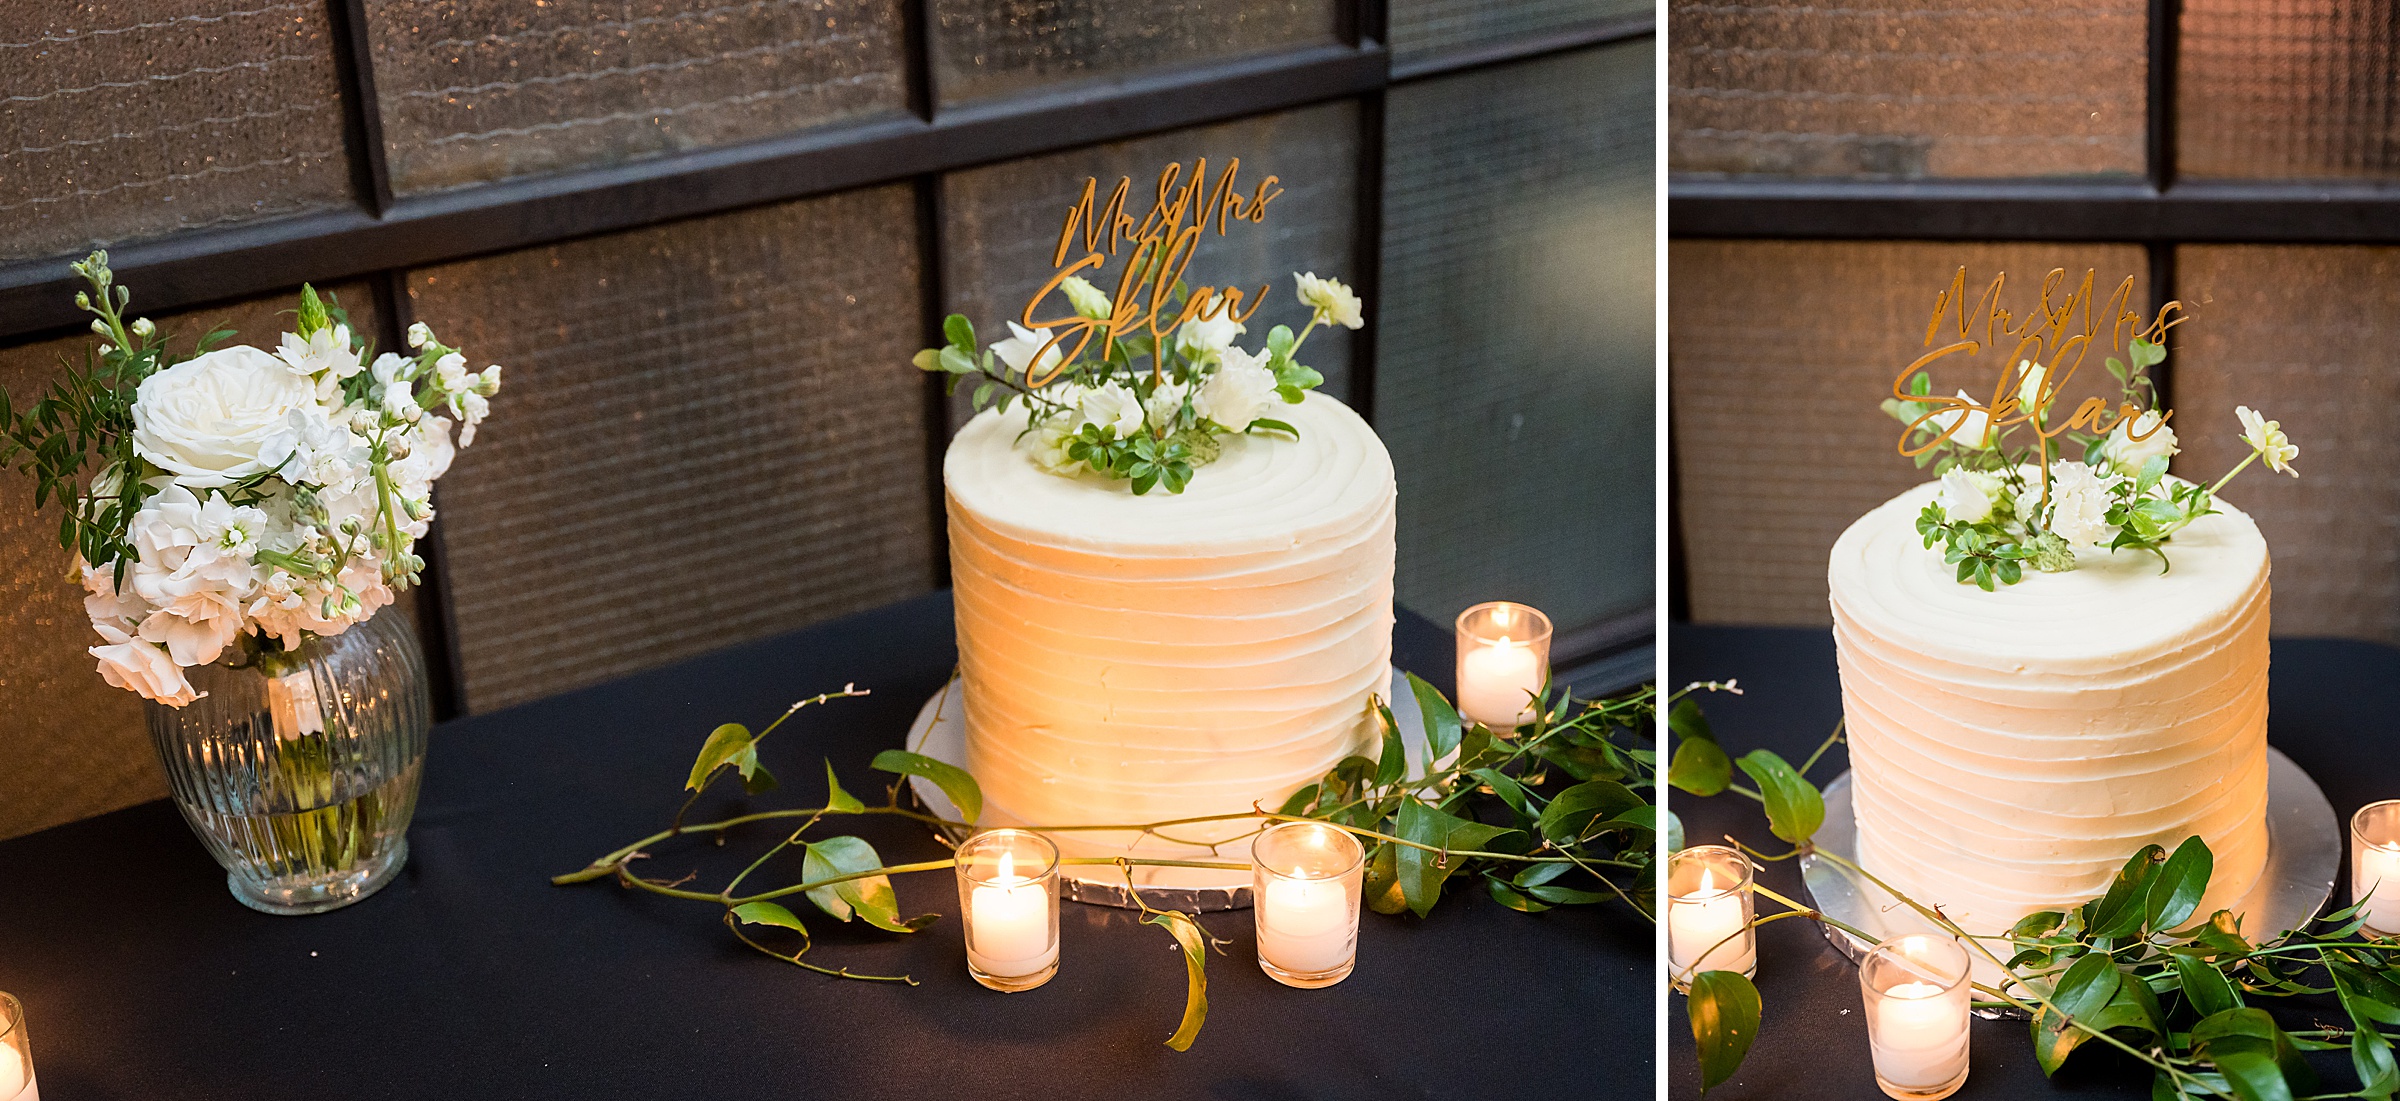 Two picturesque photos of a wedding cake adorned with candles and greenery from Lilah Events.